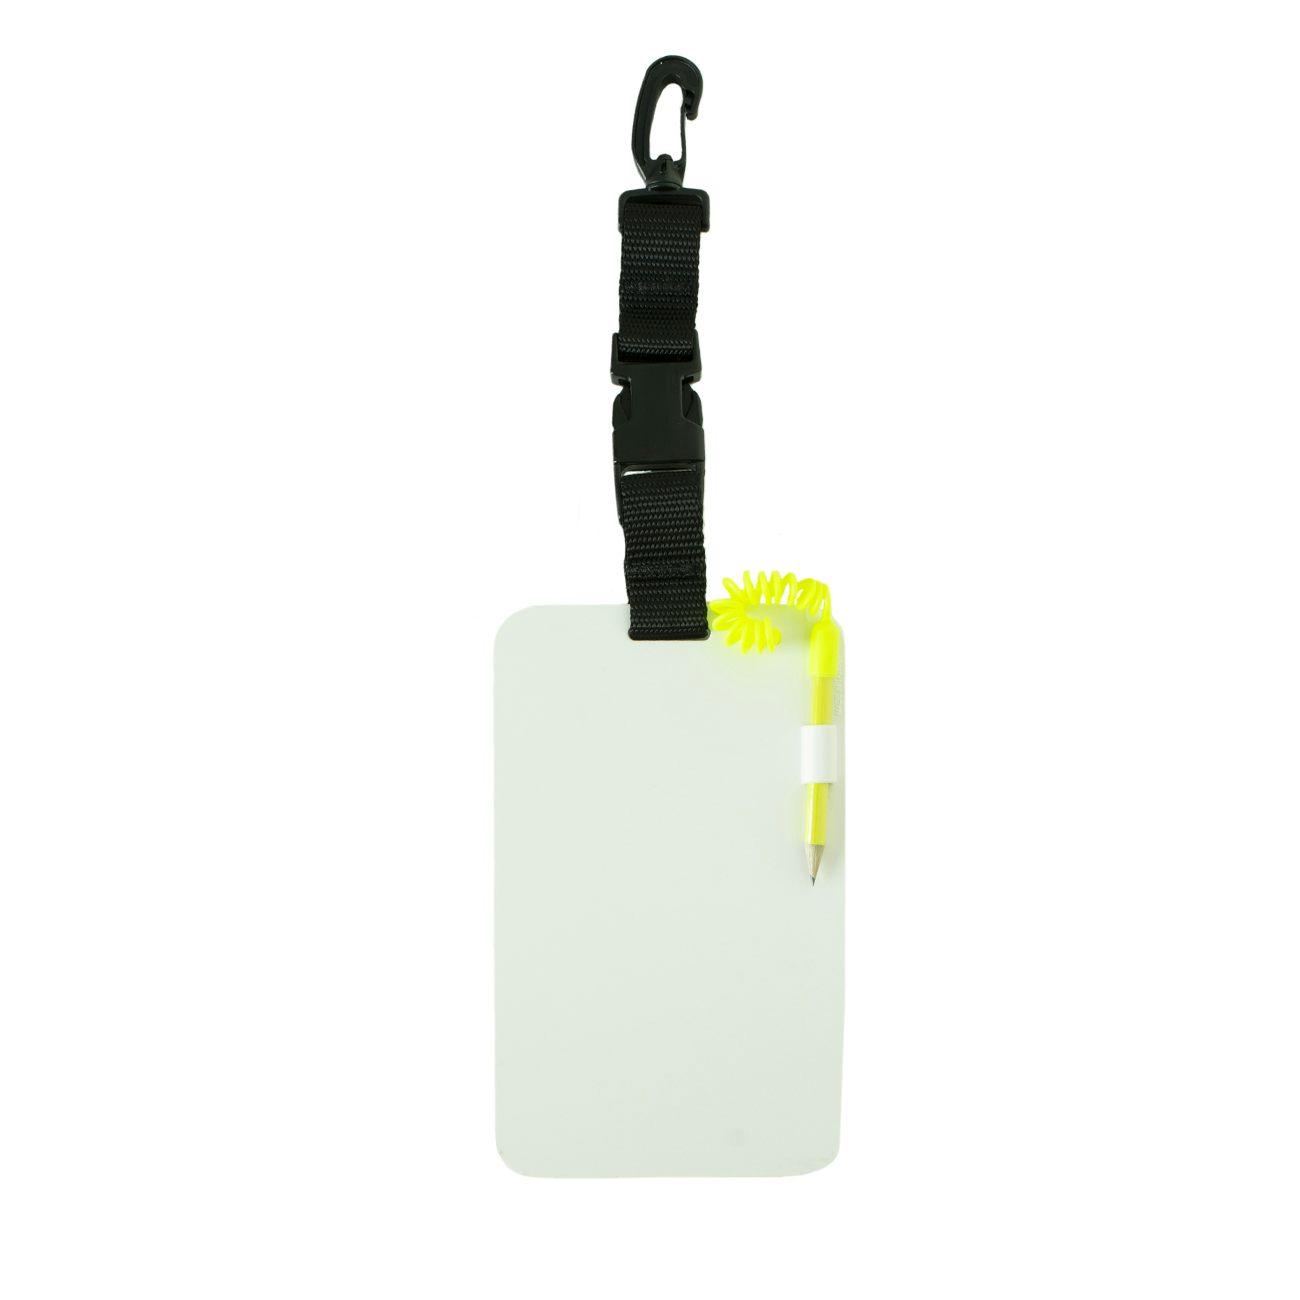 Scuba Diving Slate with Detachable Clip (4 x 8 inches)